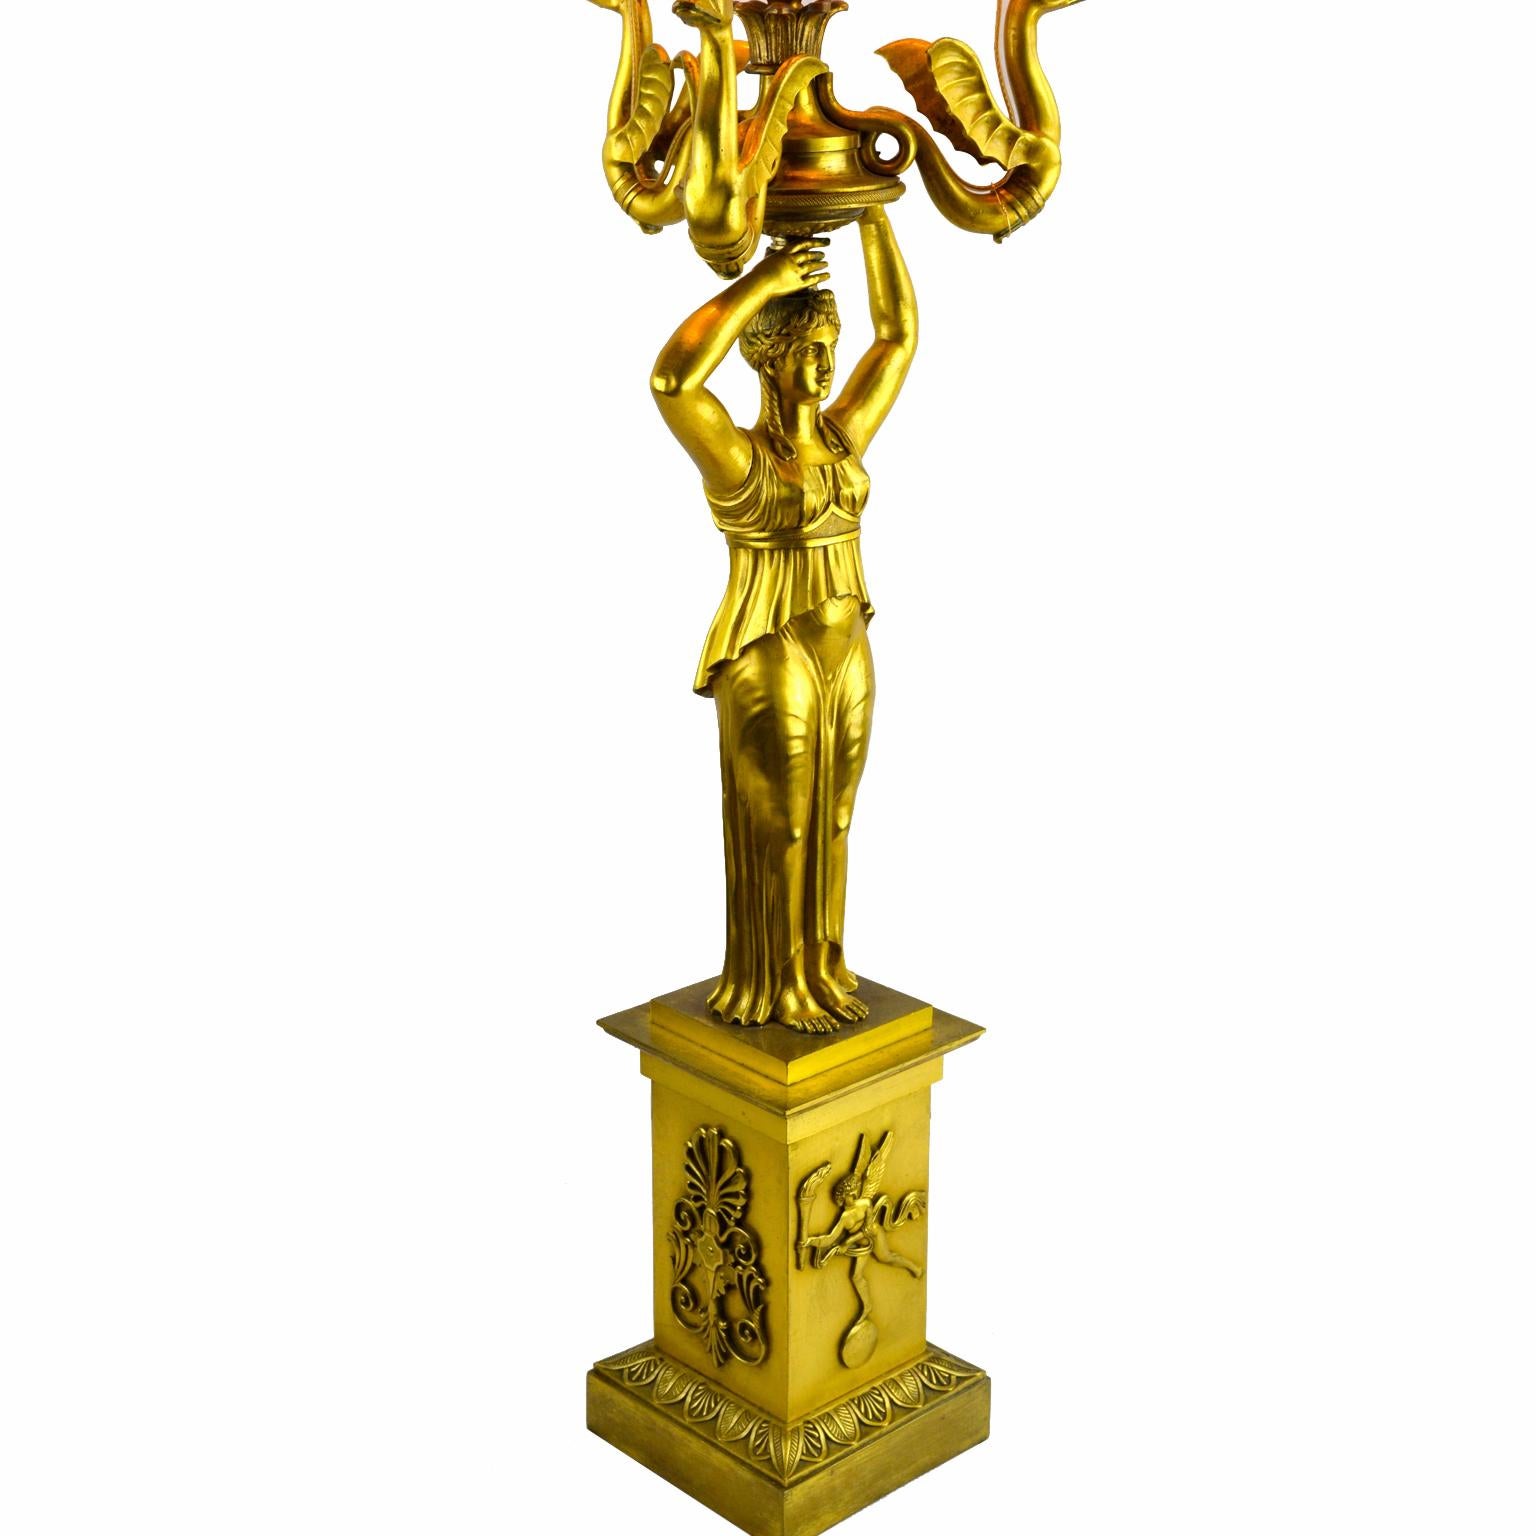 A finely cast and gilded Russian Empire style candelabra that was transformed into a lamp; featuring a classical maiden holding aloft three winged sea horses terminating in candle nozzles around a central flame nozzle; the rectangular base decorated